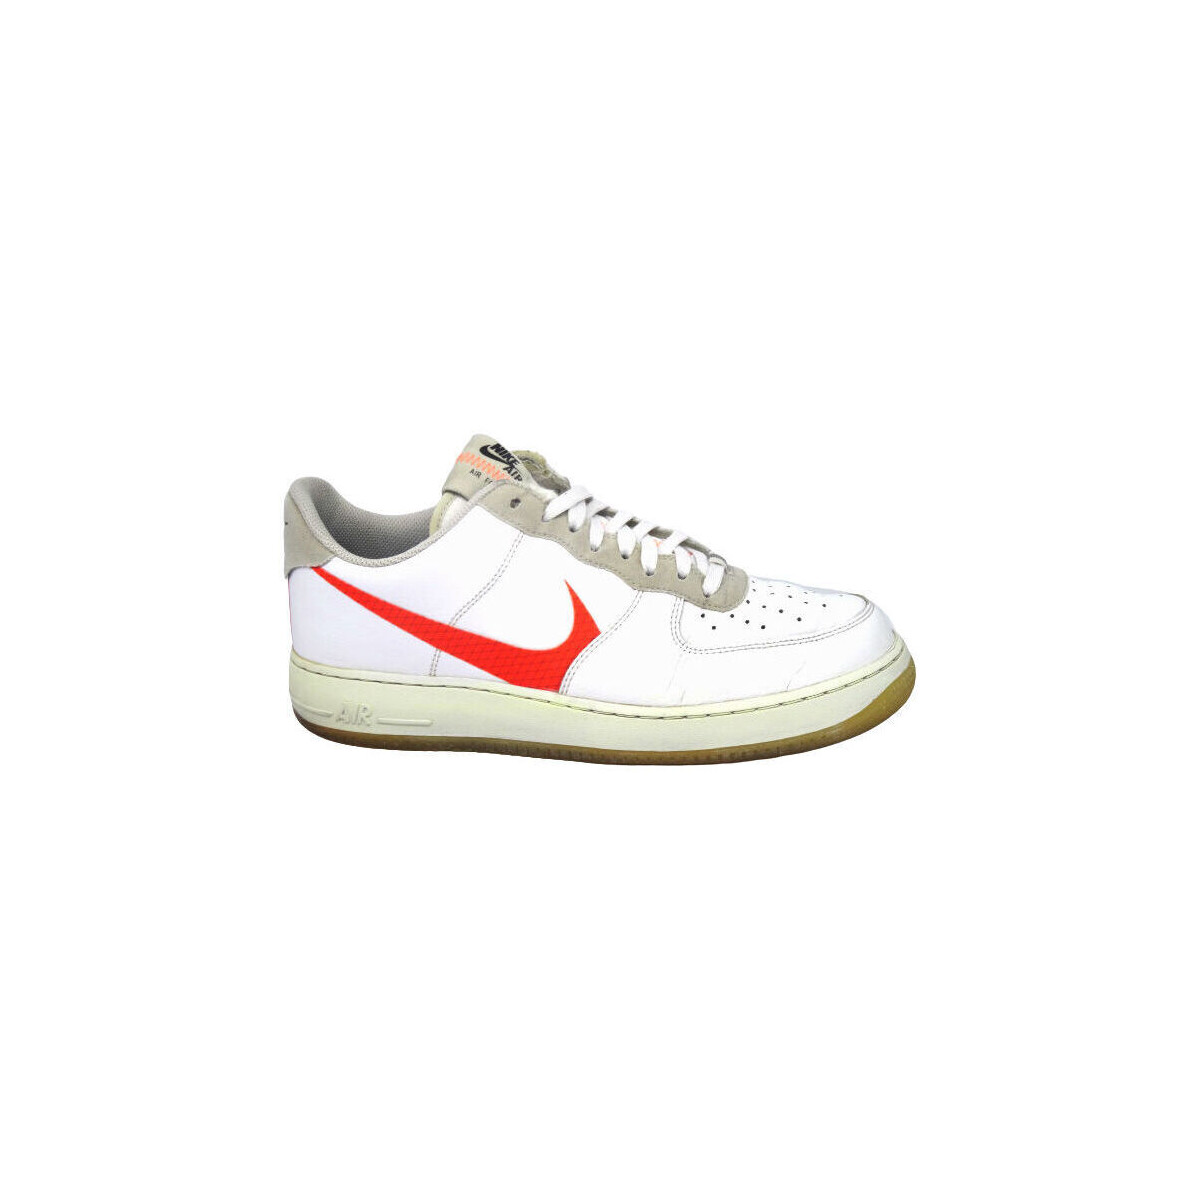 Basket Nike Reconditionne Air Force 1   27301296 1200 A